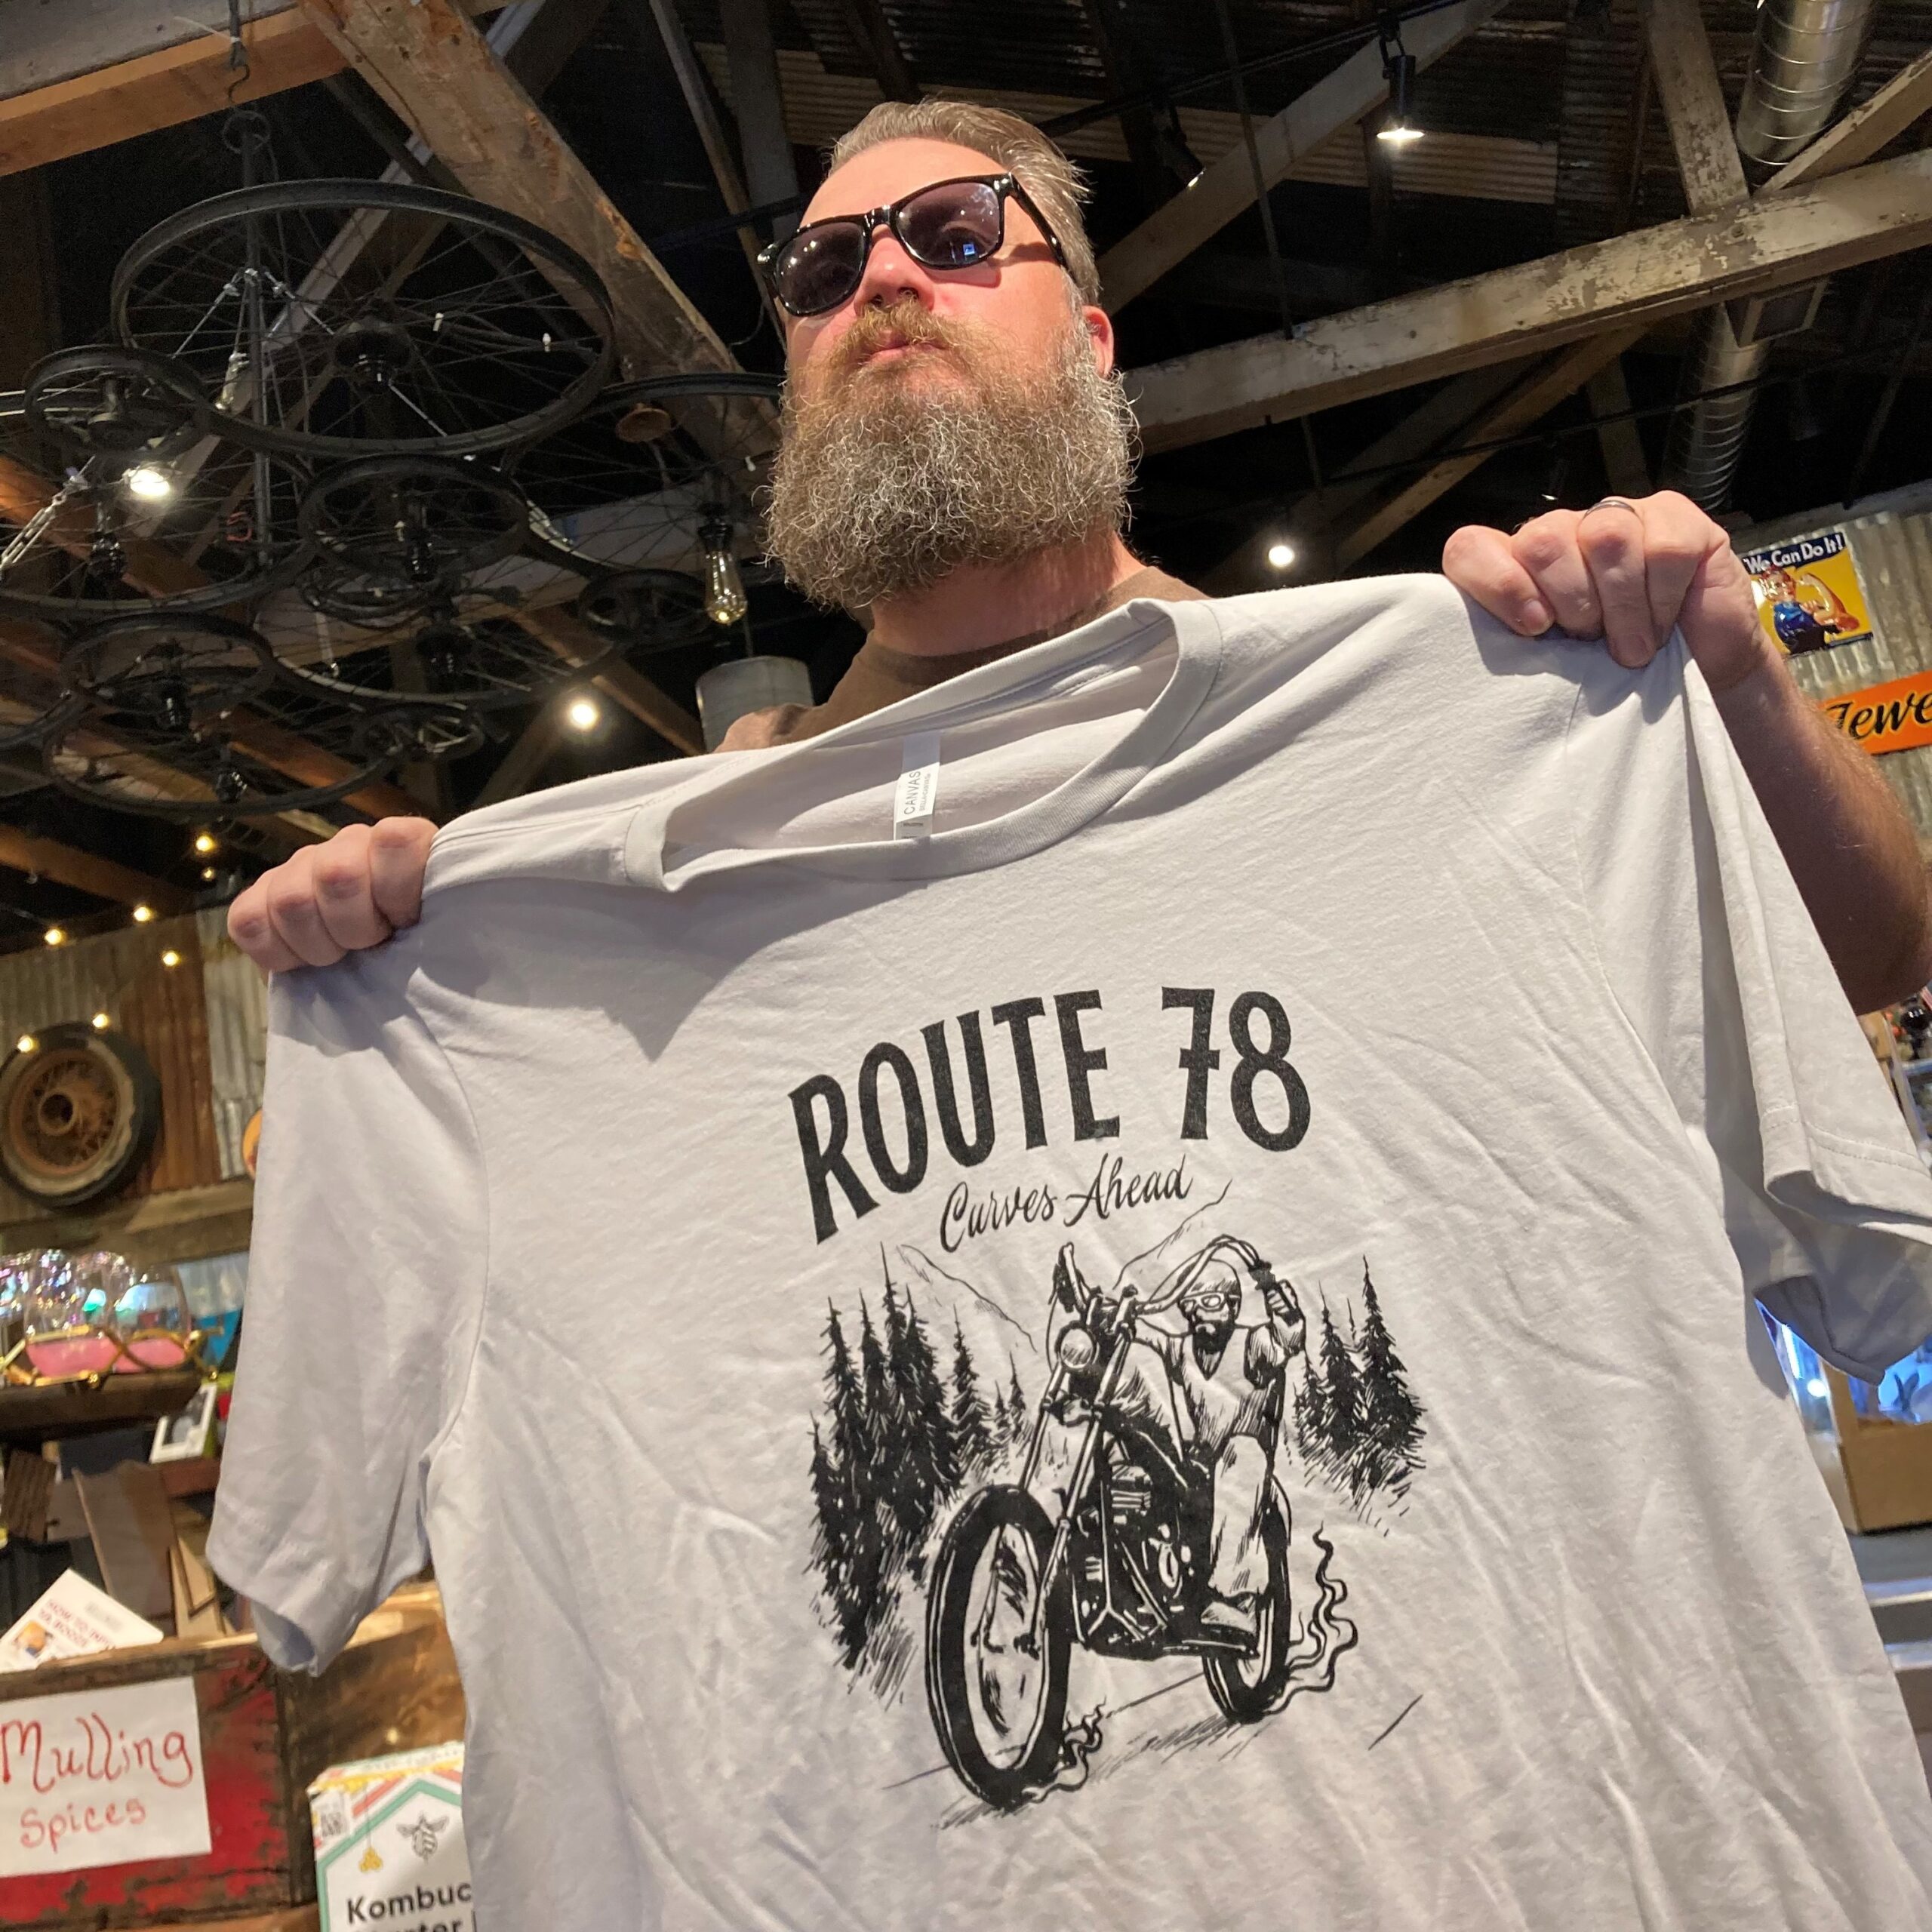 Man holding Route 78 t shirt photo